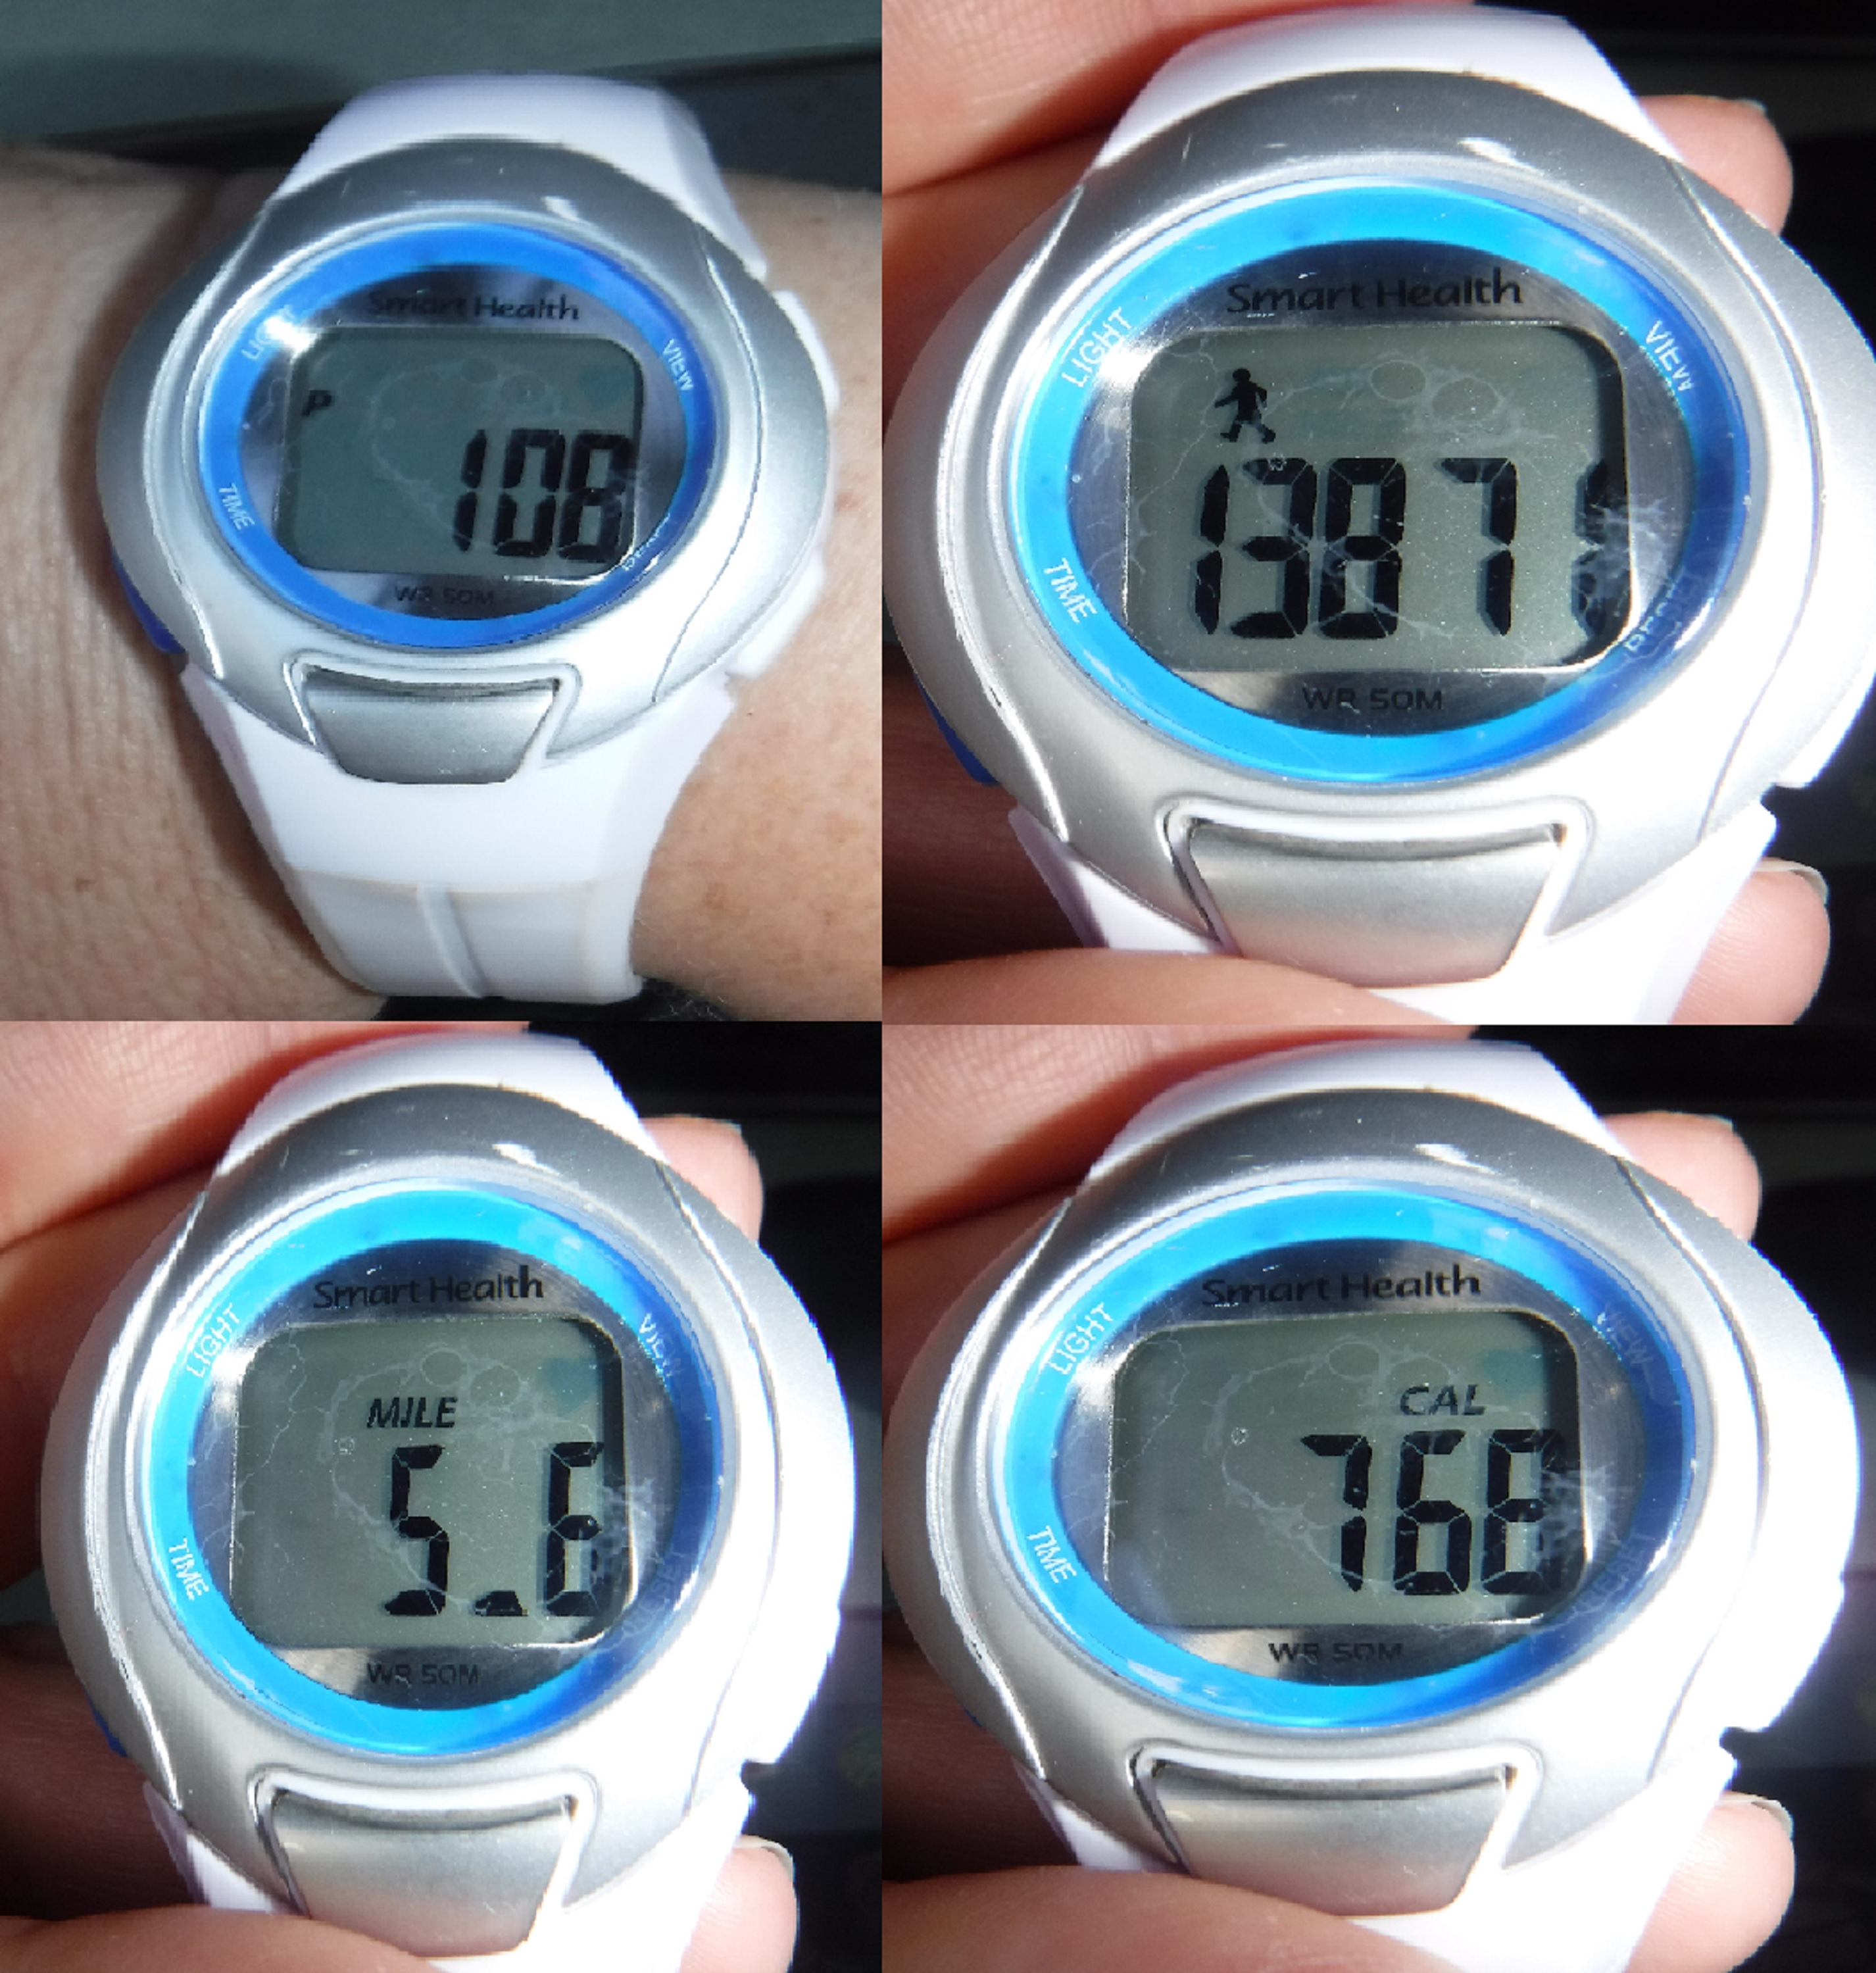 Photos I took of the different settings on my watch and "collaged"